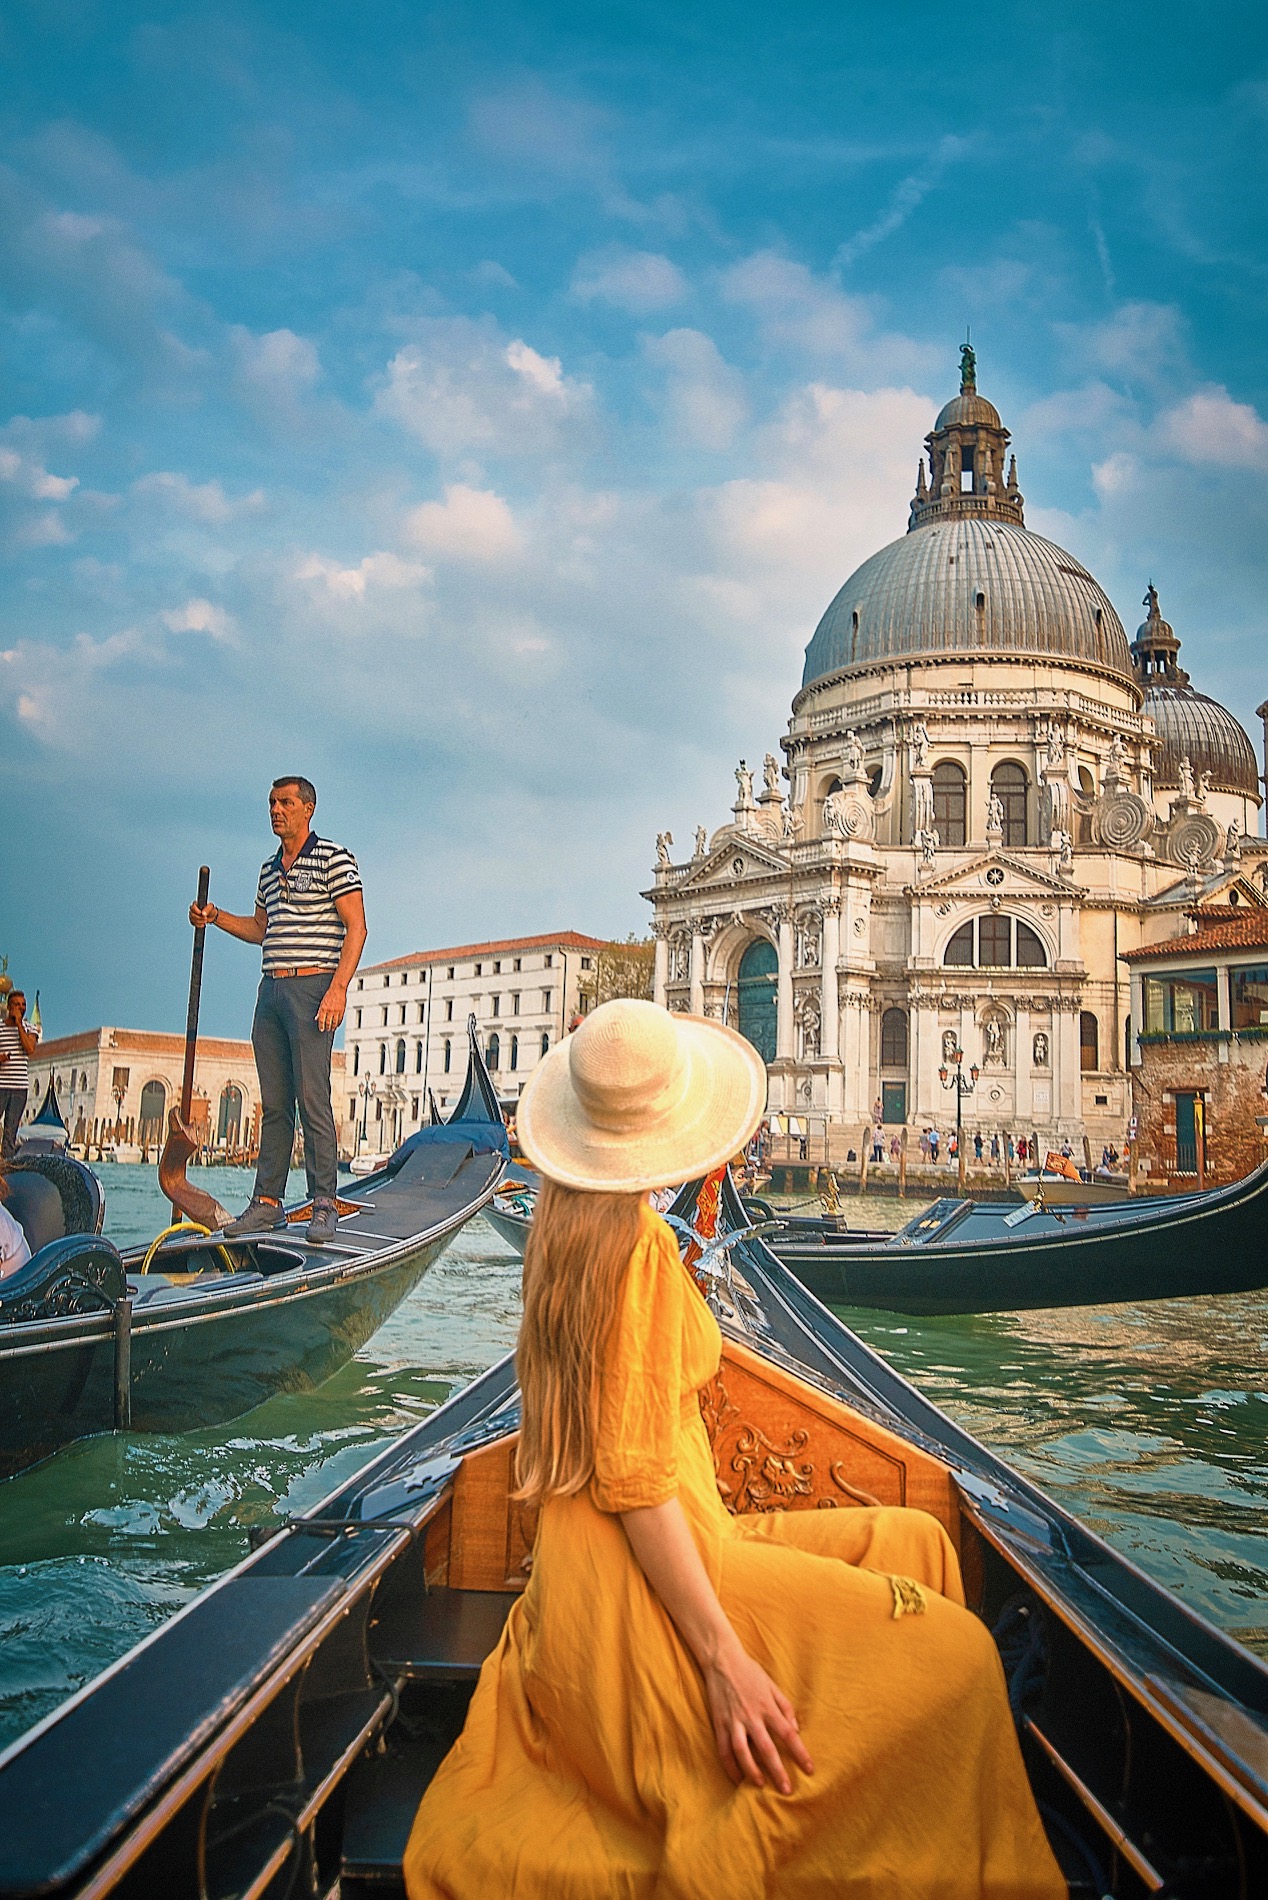 Woman in a yellow dress and sun hat rides in a gondola on the Grand Canal of Venice, Italy.